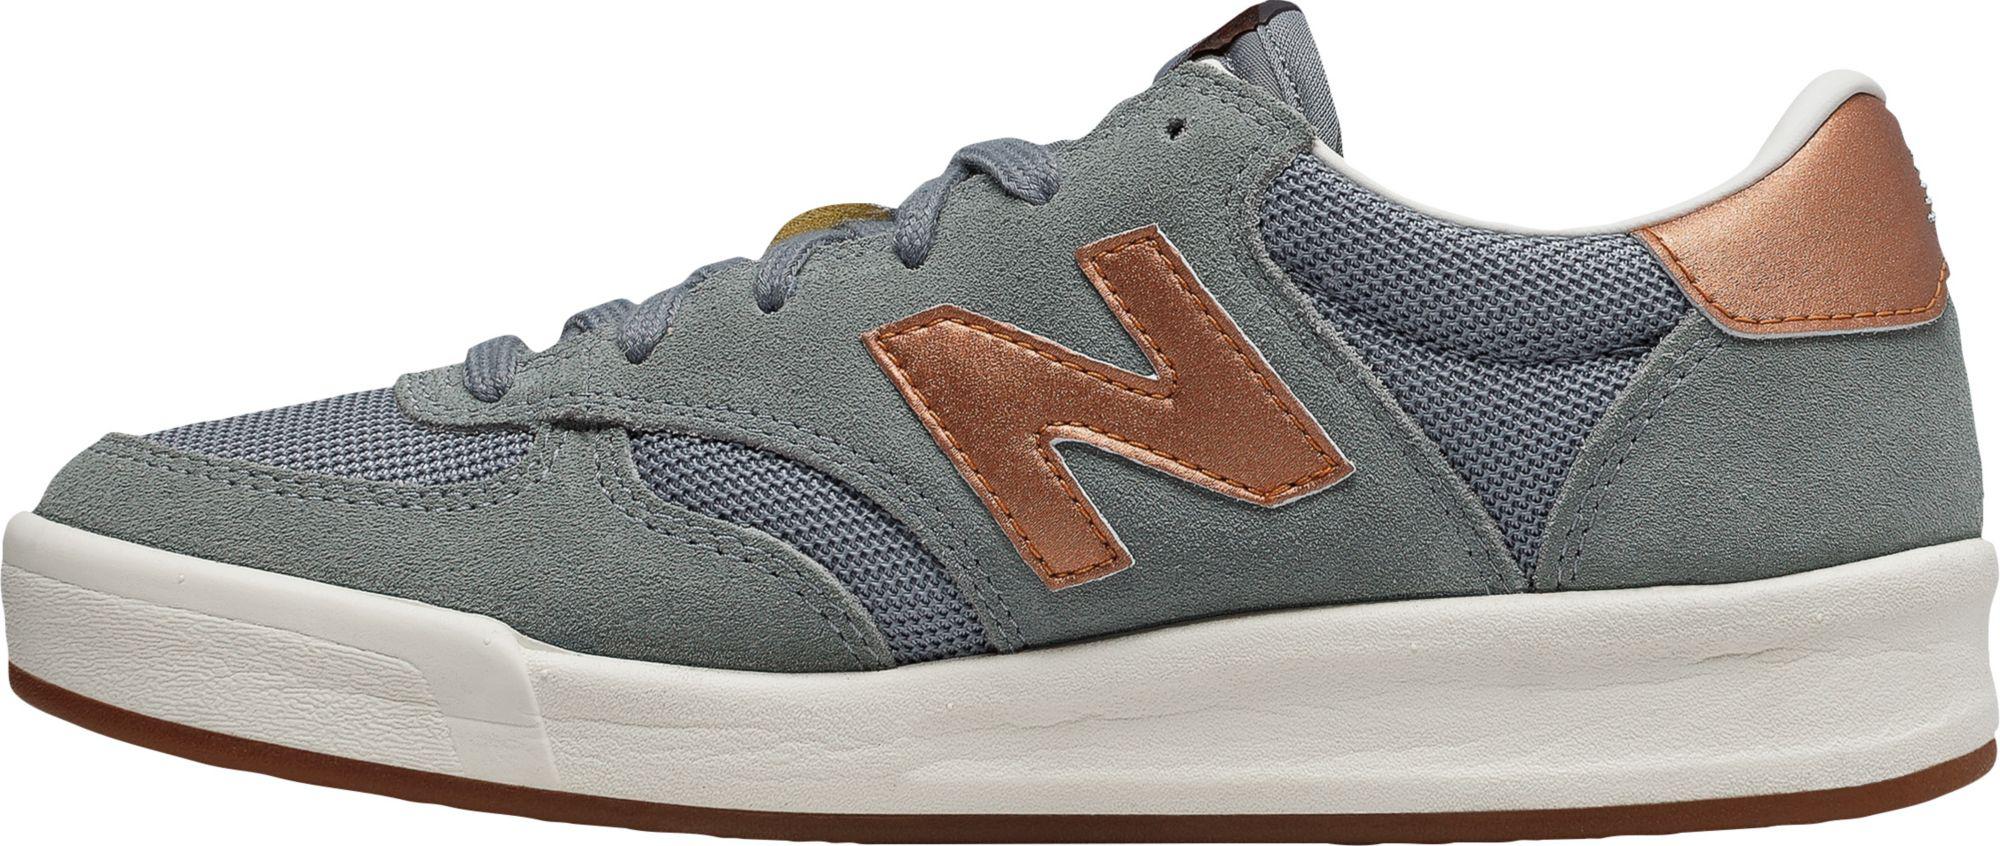 Lyst New Balance 300 Shoes in Gray for Men